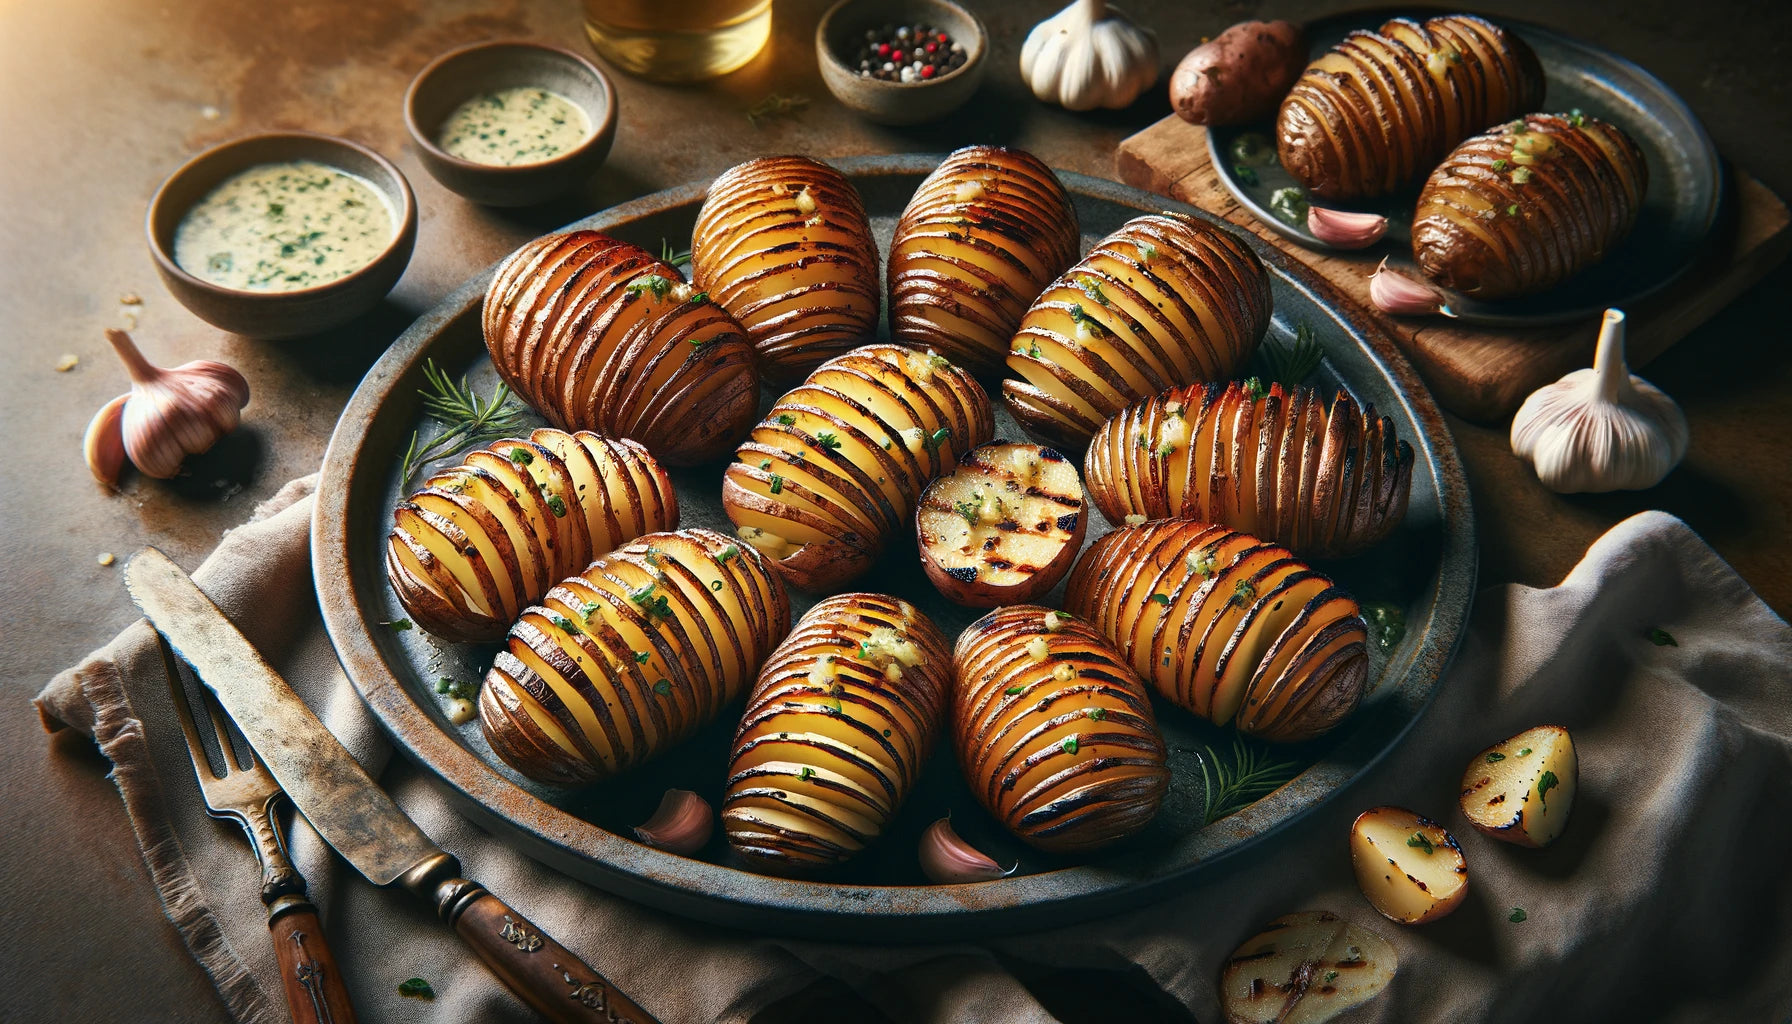 Grilled Hasselback Potatoes from @zimmysnook, featuring perfectly sliced potatoes with crispy edges and moist centers